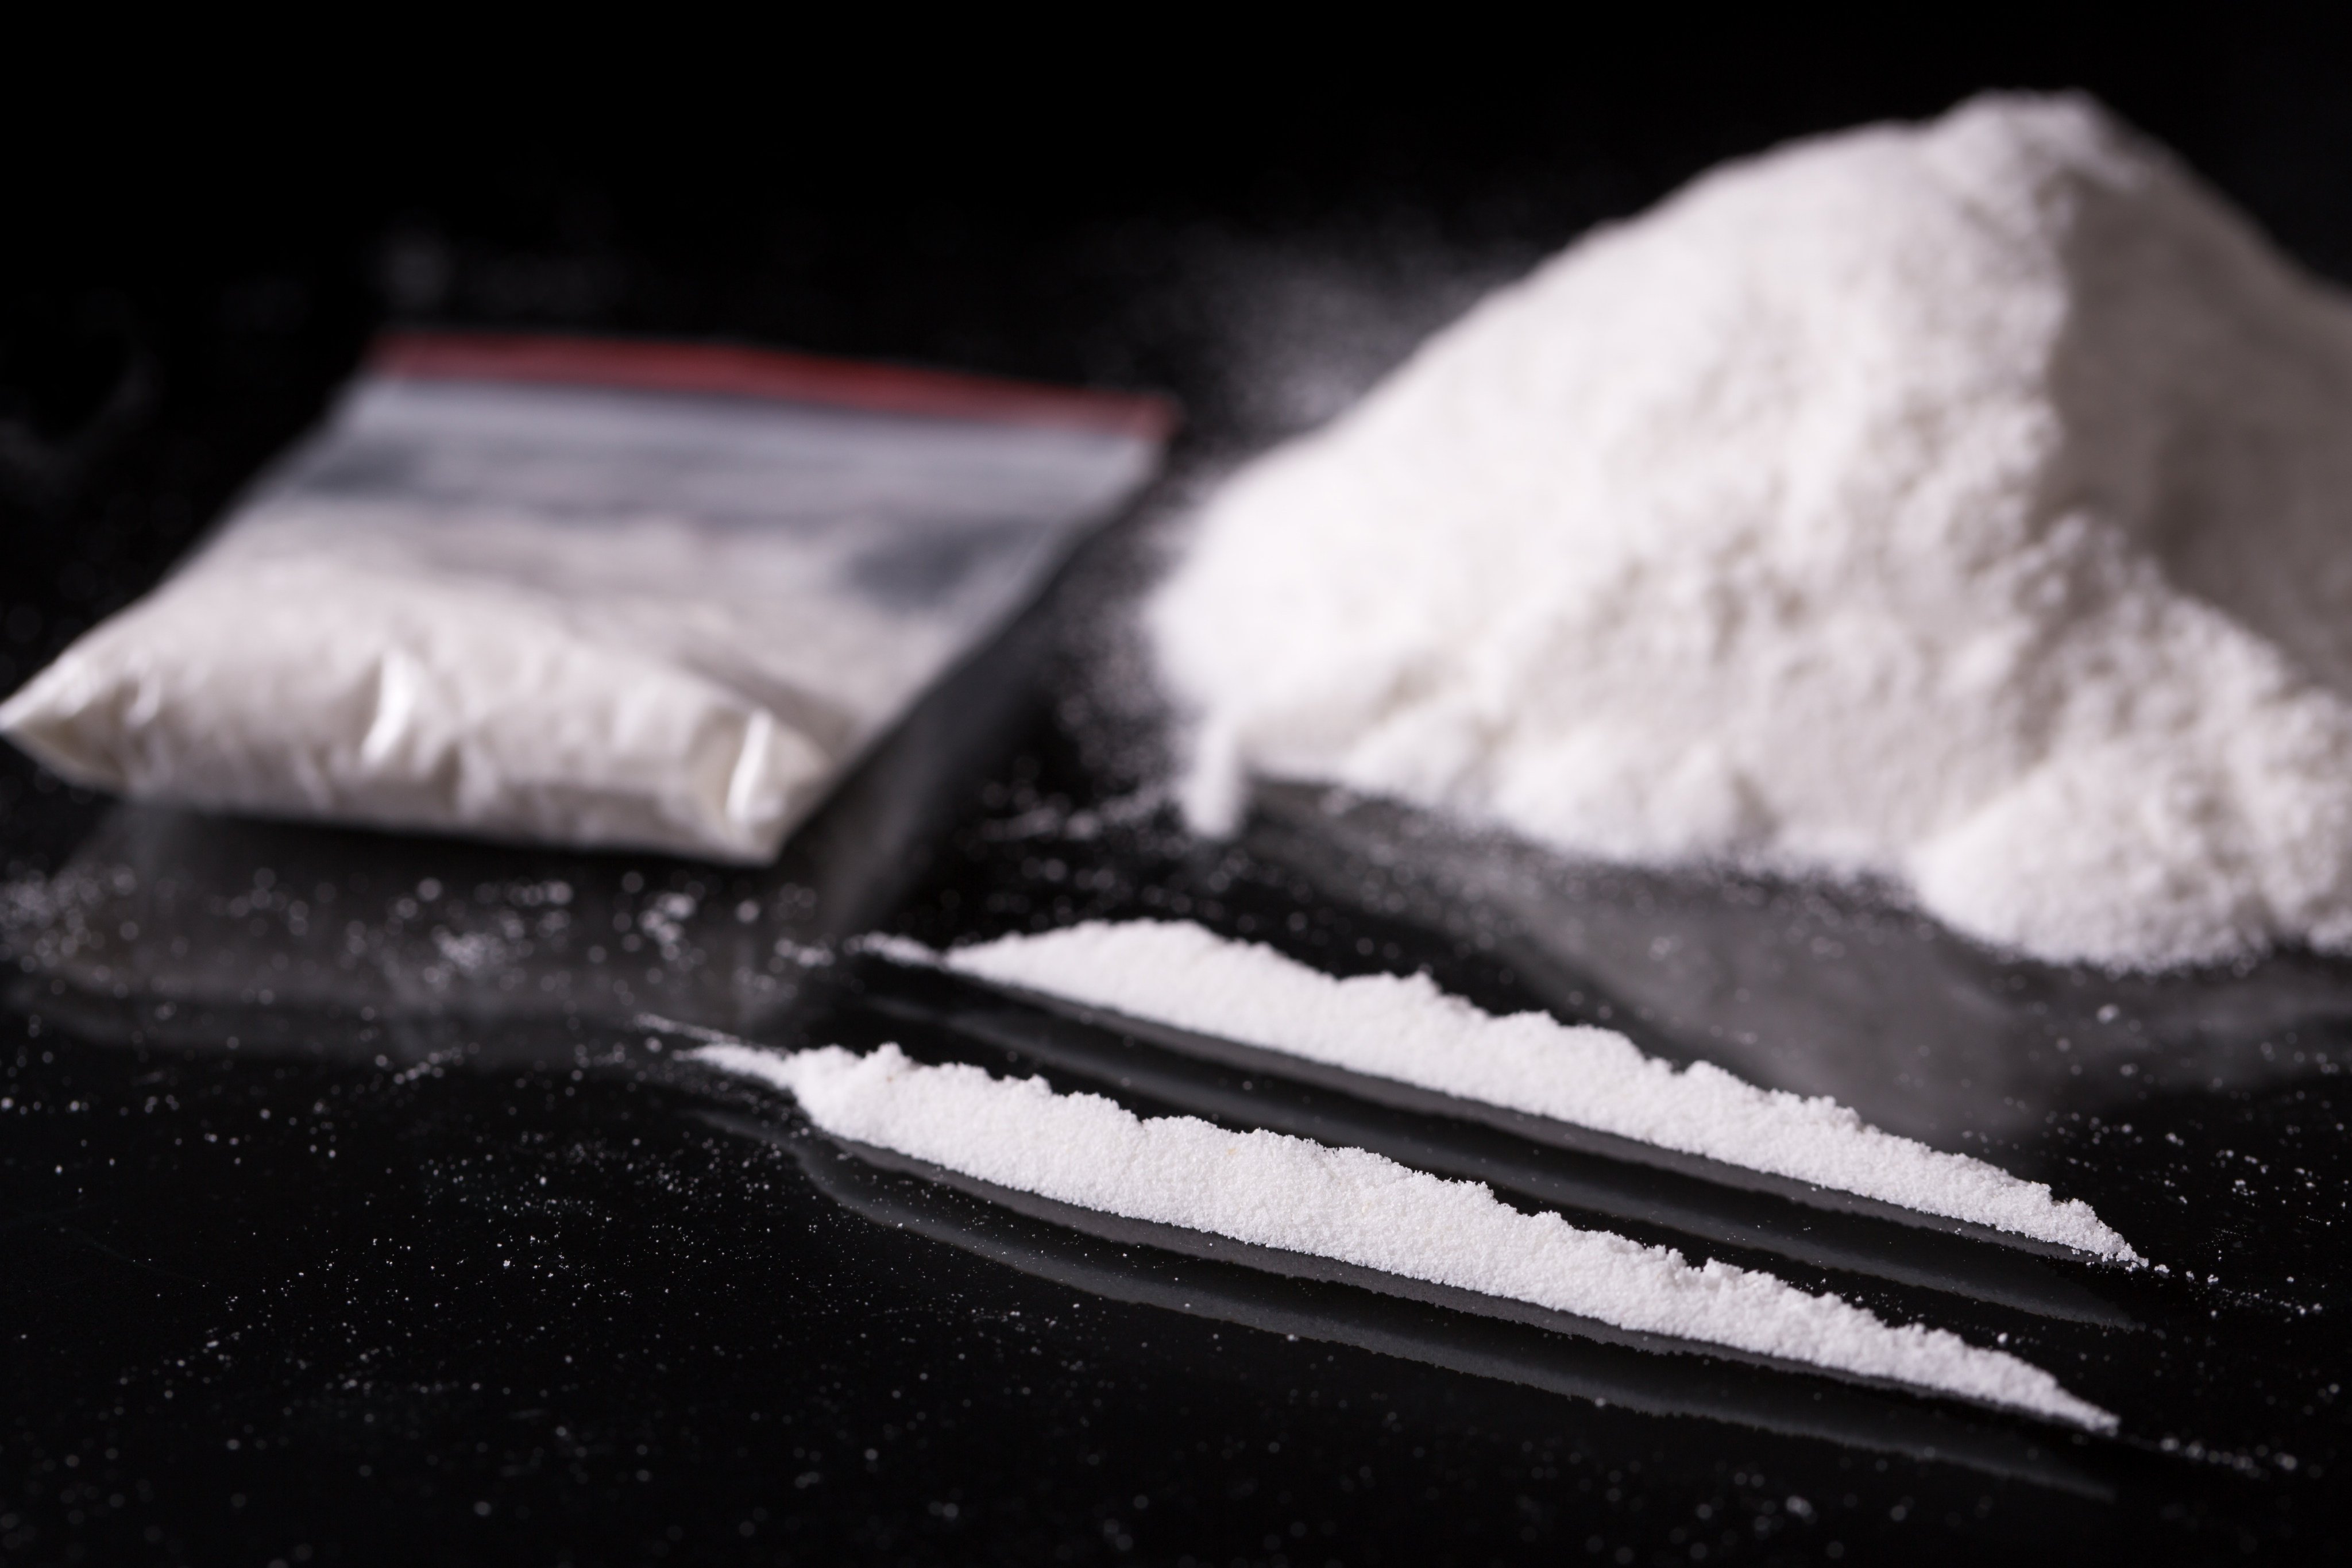 Malaysian police seized drugs worth US$85,000 during a raid on a luxury flat in Selangor state. Photo: Shutterstock